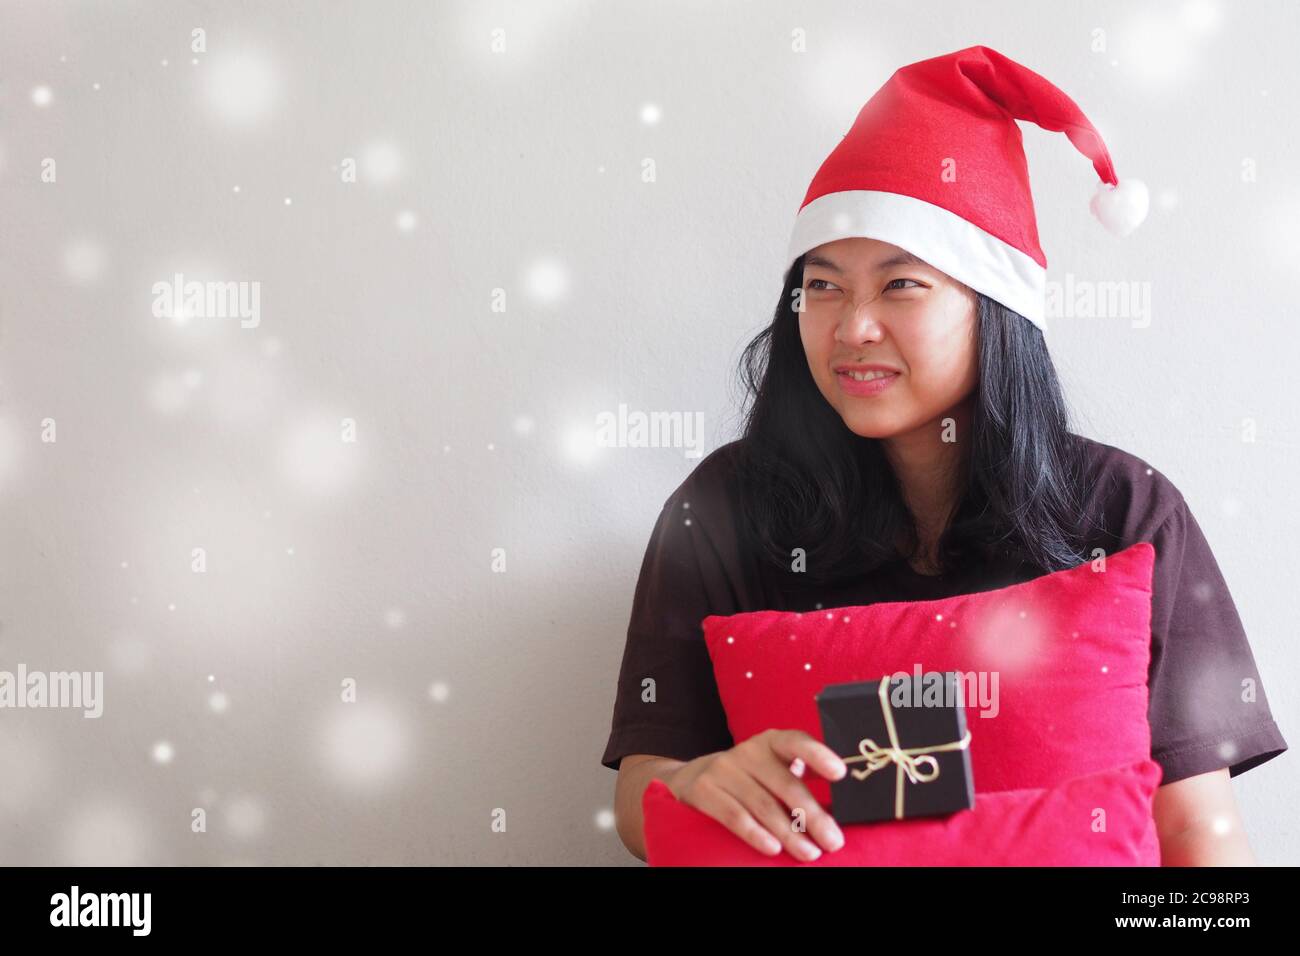 Young Woman wearing a Santa hat and sitting, waiting for the gift with Snow scene and Copy space. Stock Photo